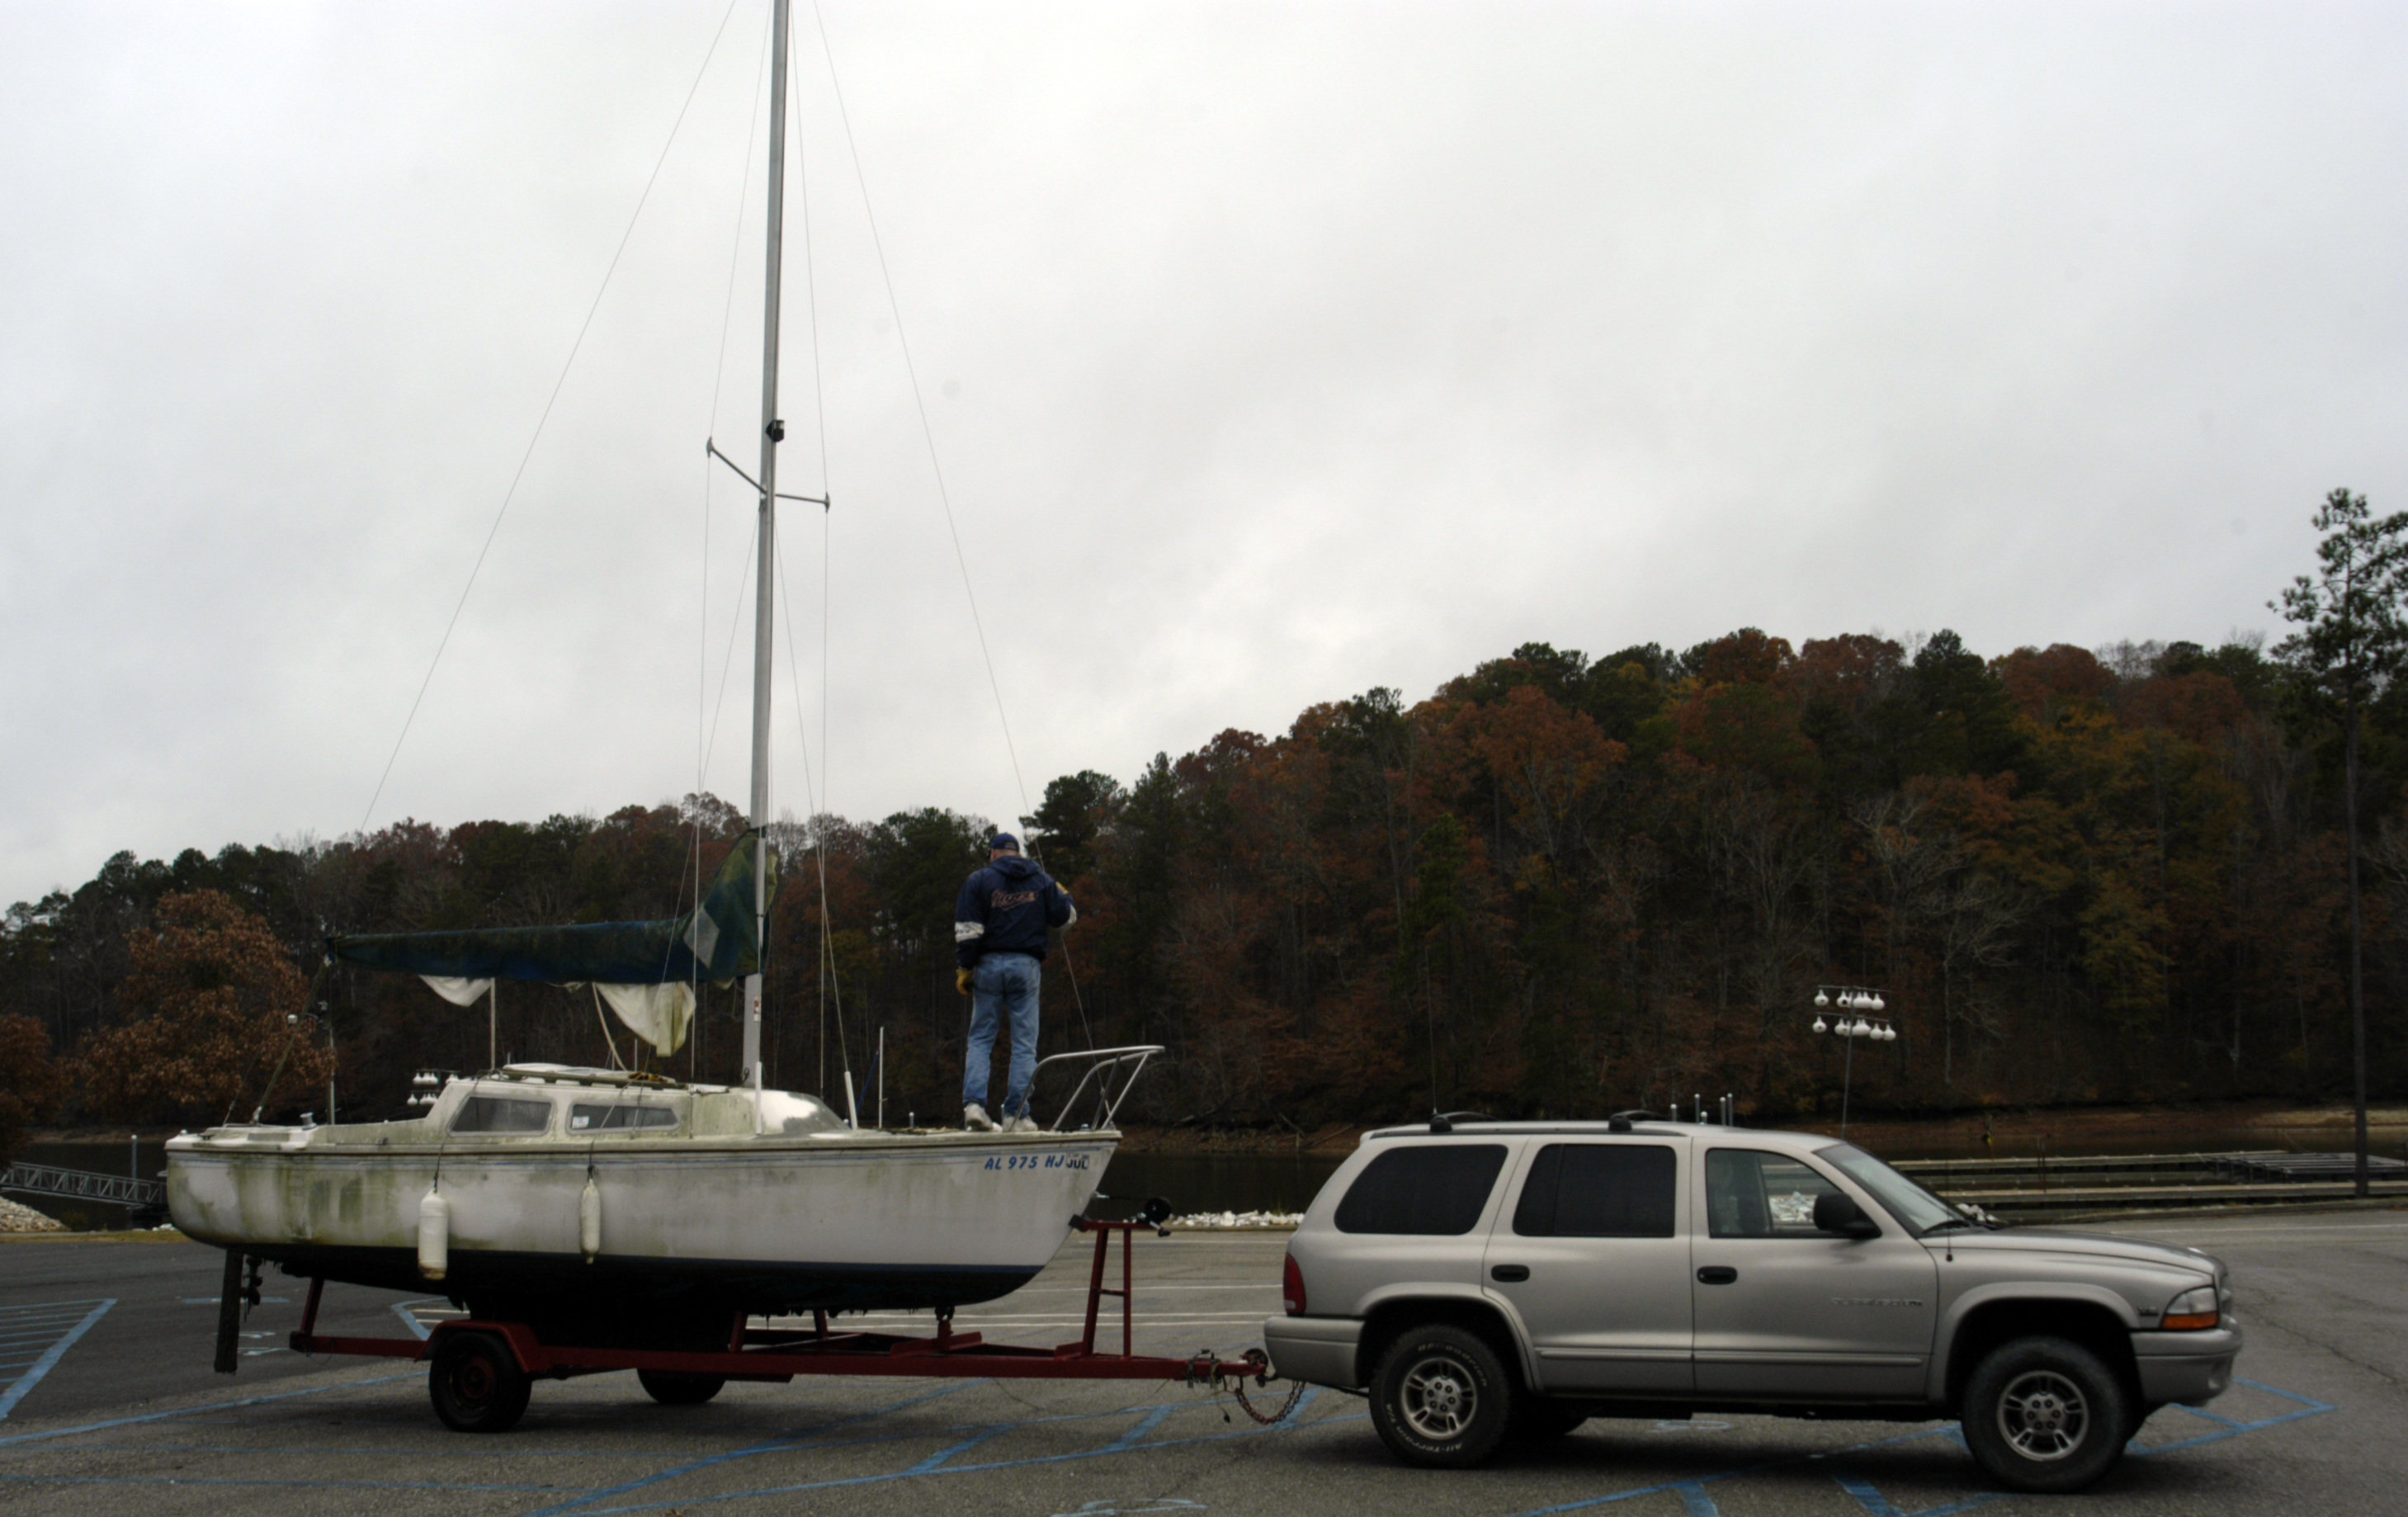 How To De-Mast a Catalina 22 Sailboat for Towing?